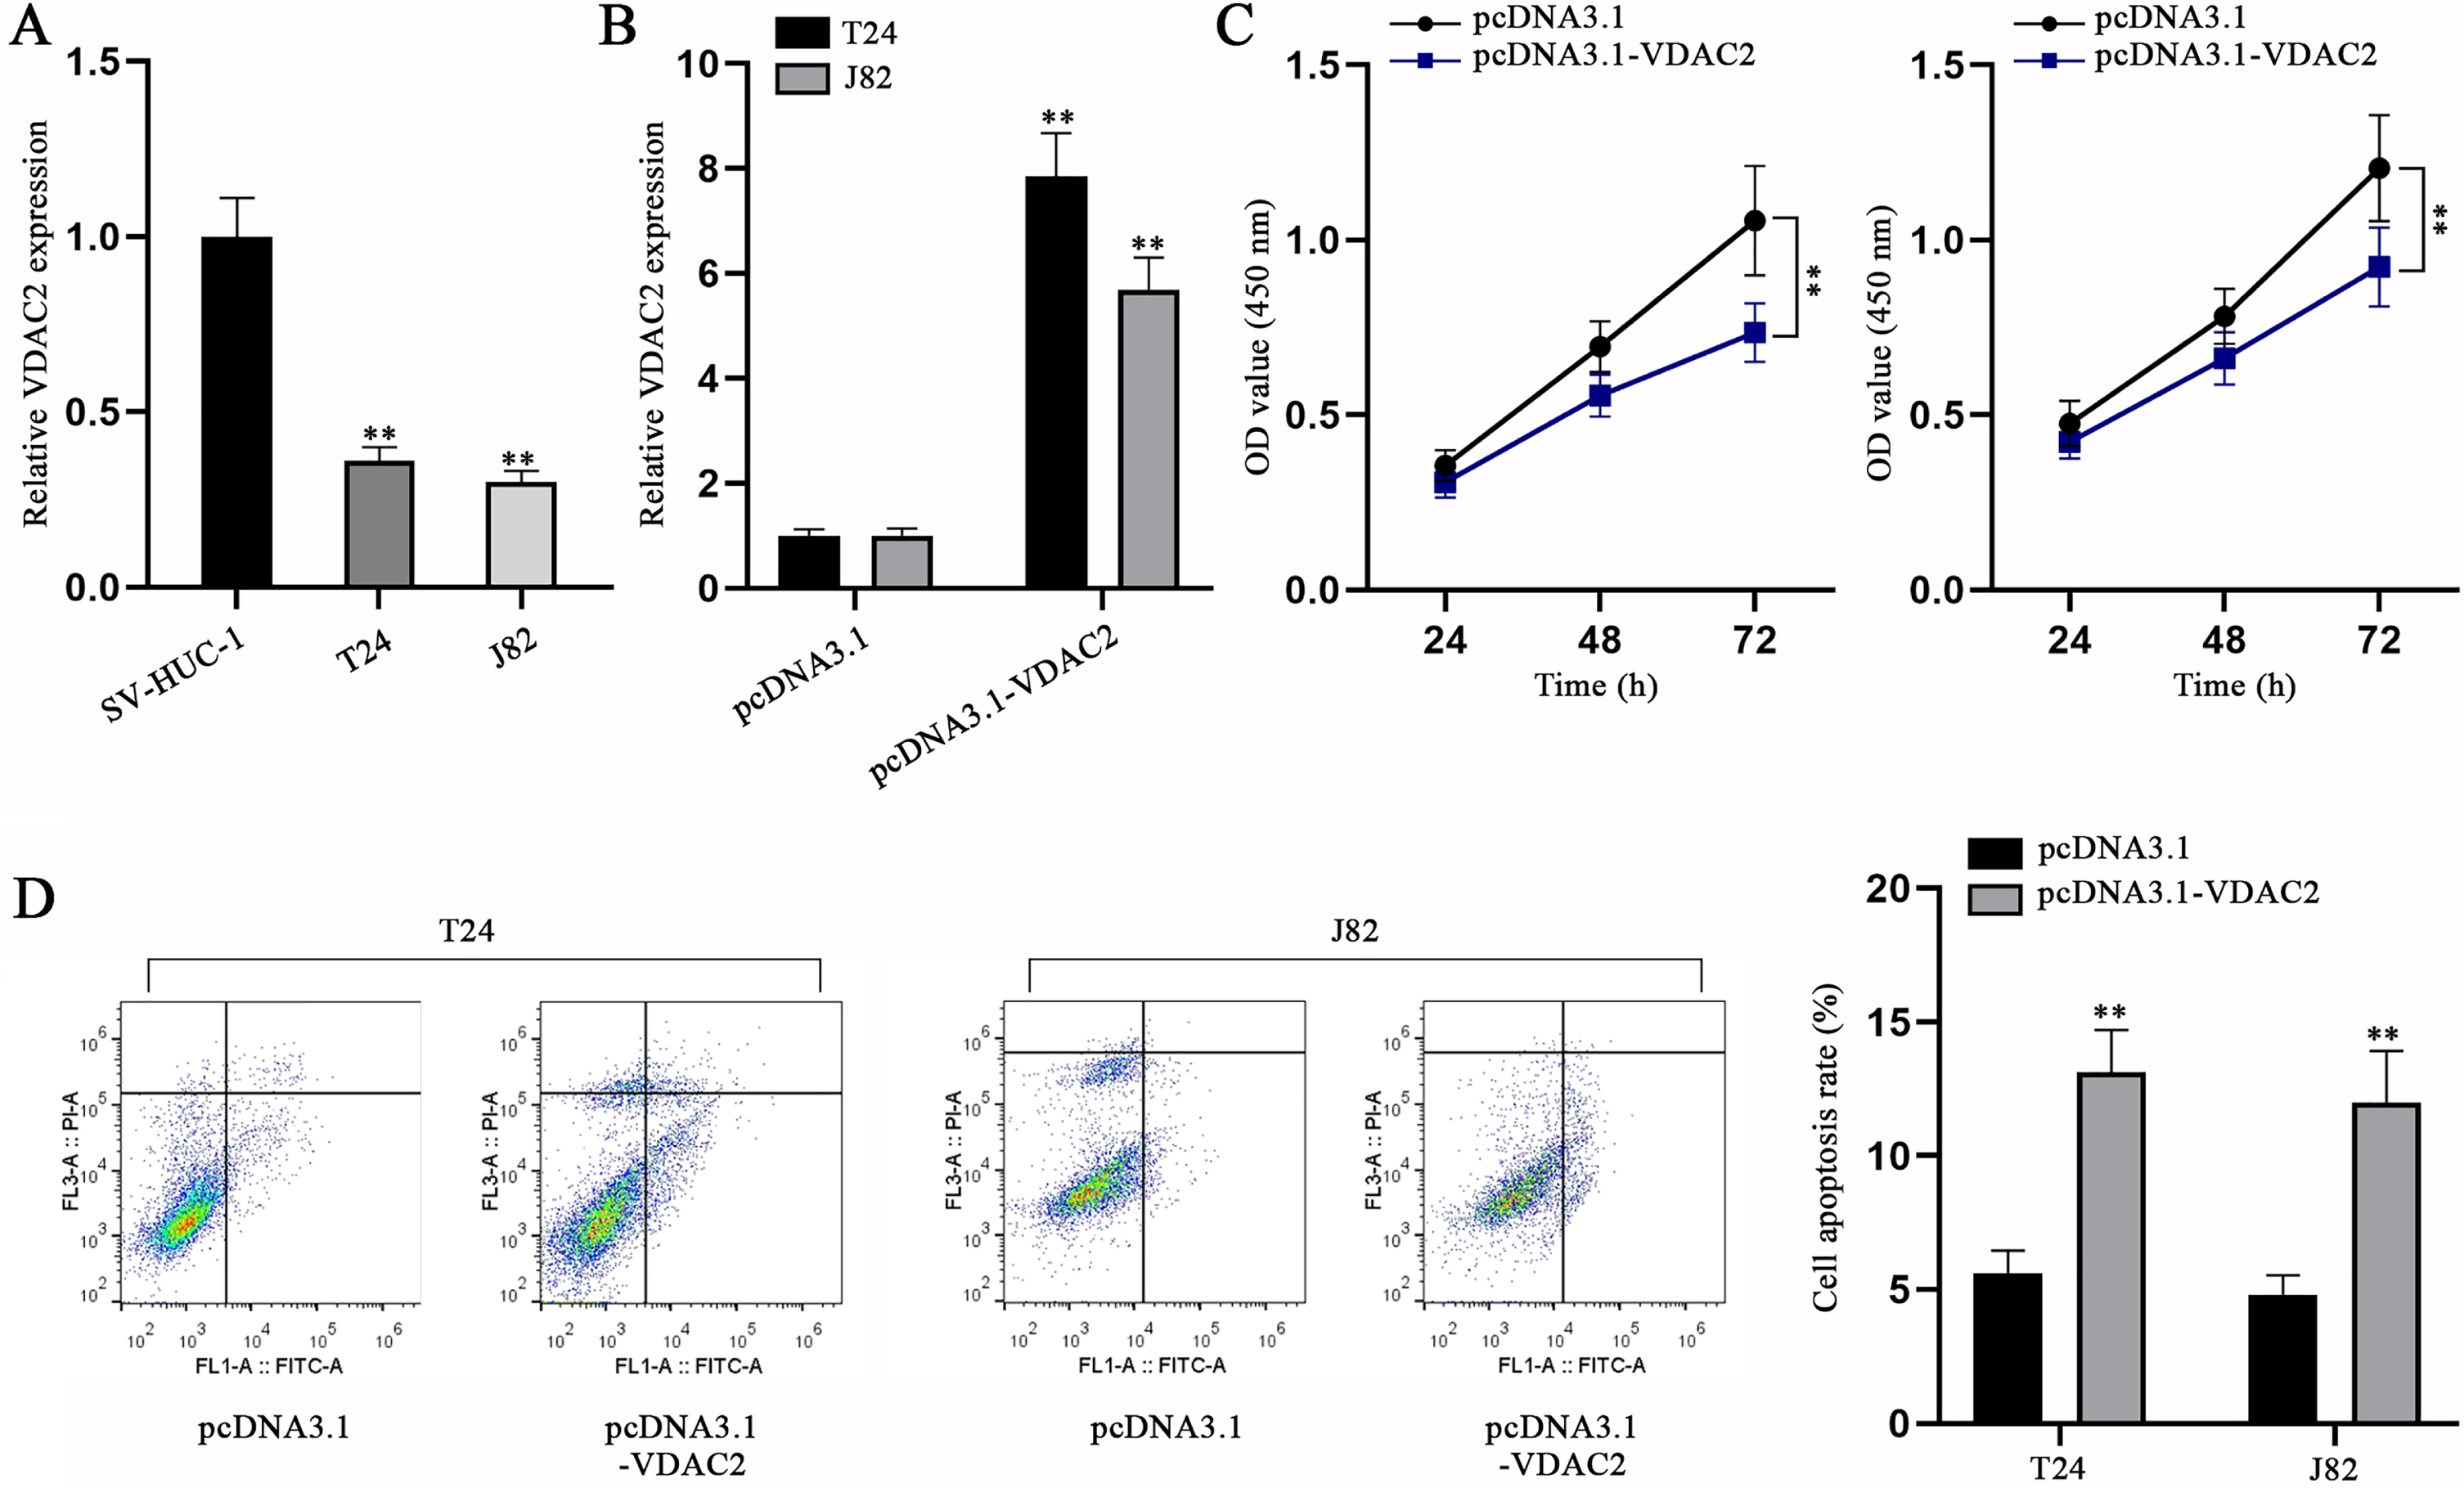 VDAC2 is down-regulated in BC cells and VDAC2 overexpression impedes BC cell proliferation but promotes BC cell apoptosis. (A) VDAC2 expression in SV-HUC-1 and BC cell lines was detected via qPCR. (B) VDAC2 expression was measured in pcDNA3.1-VDAC2-transfected cells via qPCR. (C) CCK-8 was done to evaluate the proliferation of BC cells with VDAC2 overexpression. (D) The apoptotic ability of VDAC2-overexpressed cells was detected via flow cytometry assay. **p < 0.01.